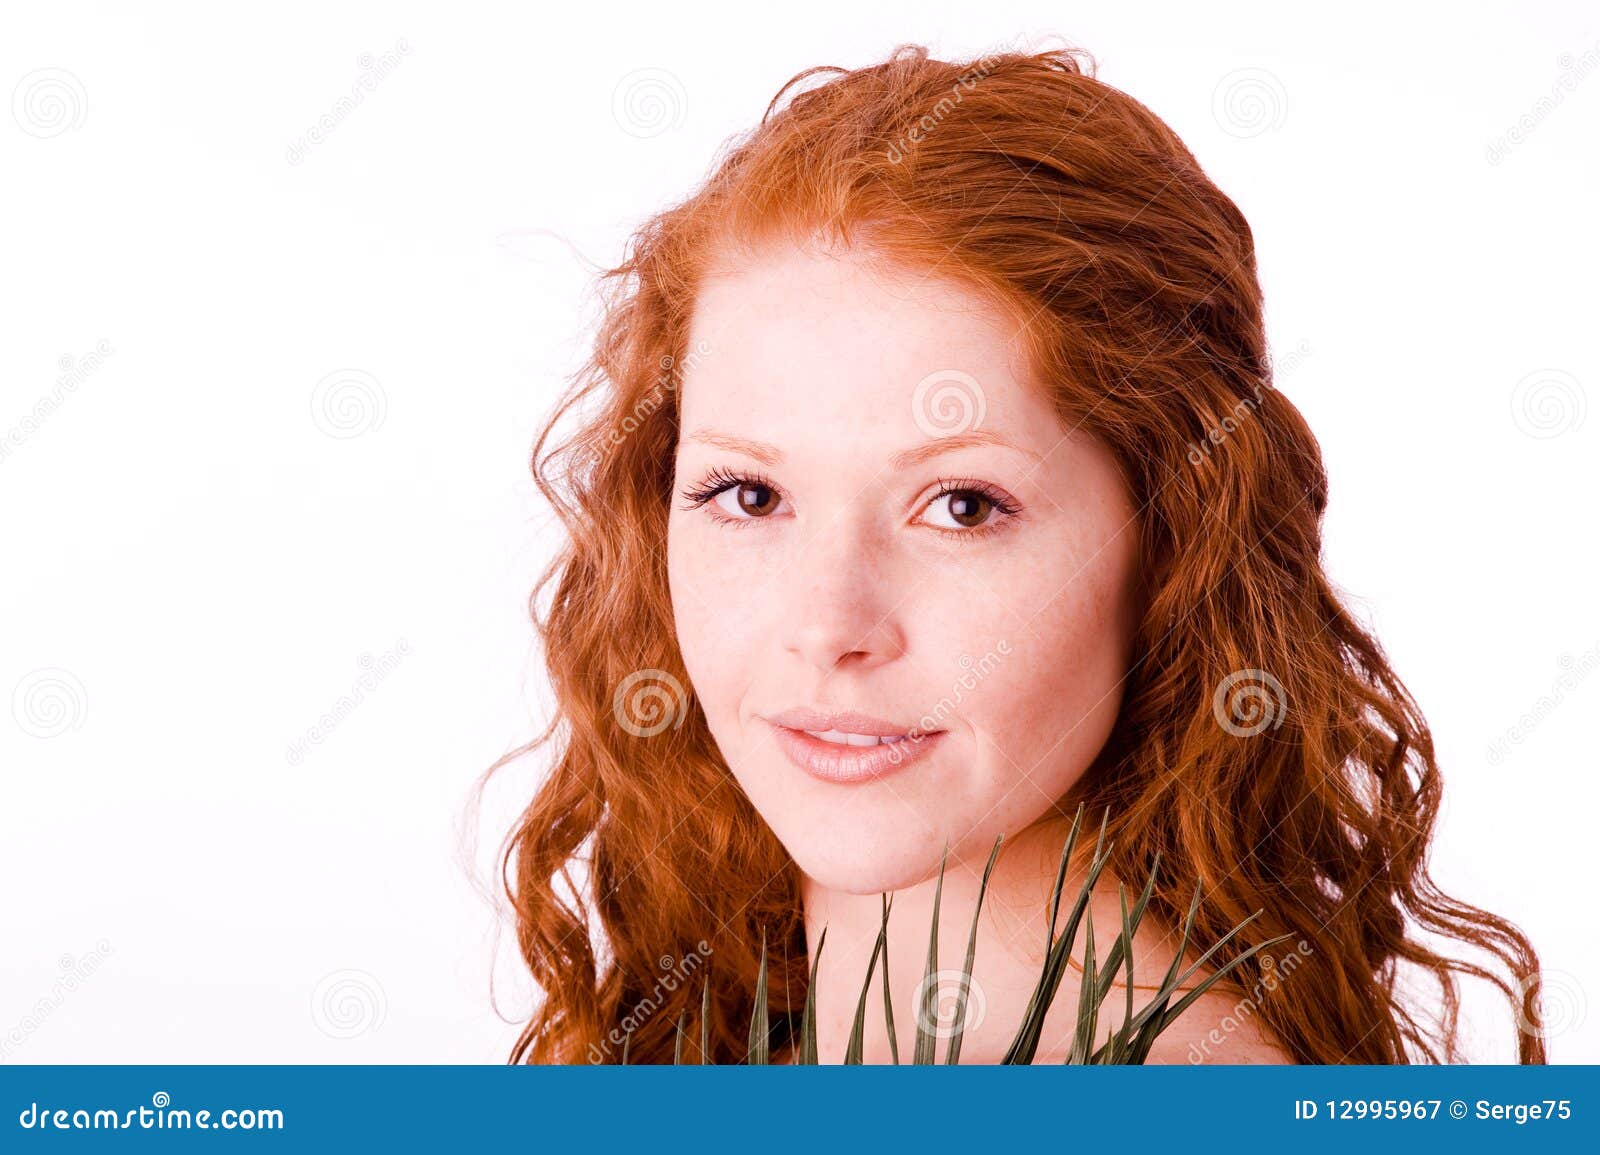 serene girl with red hair